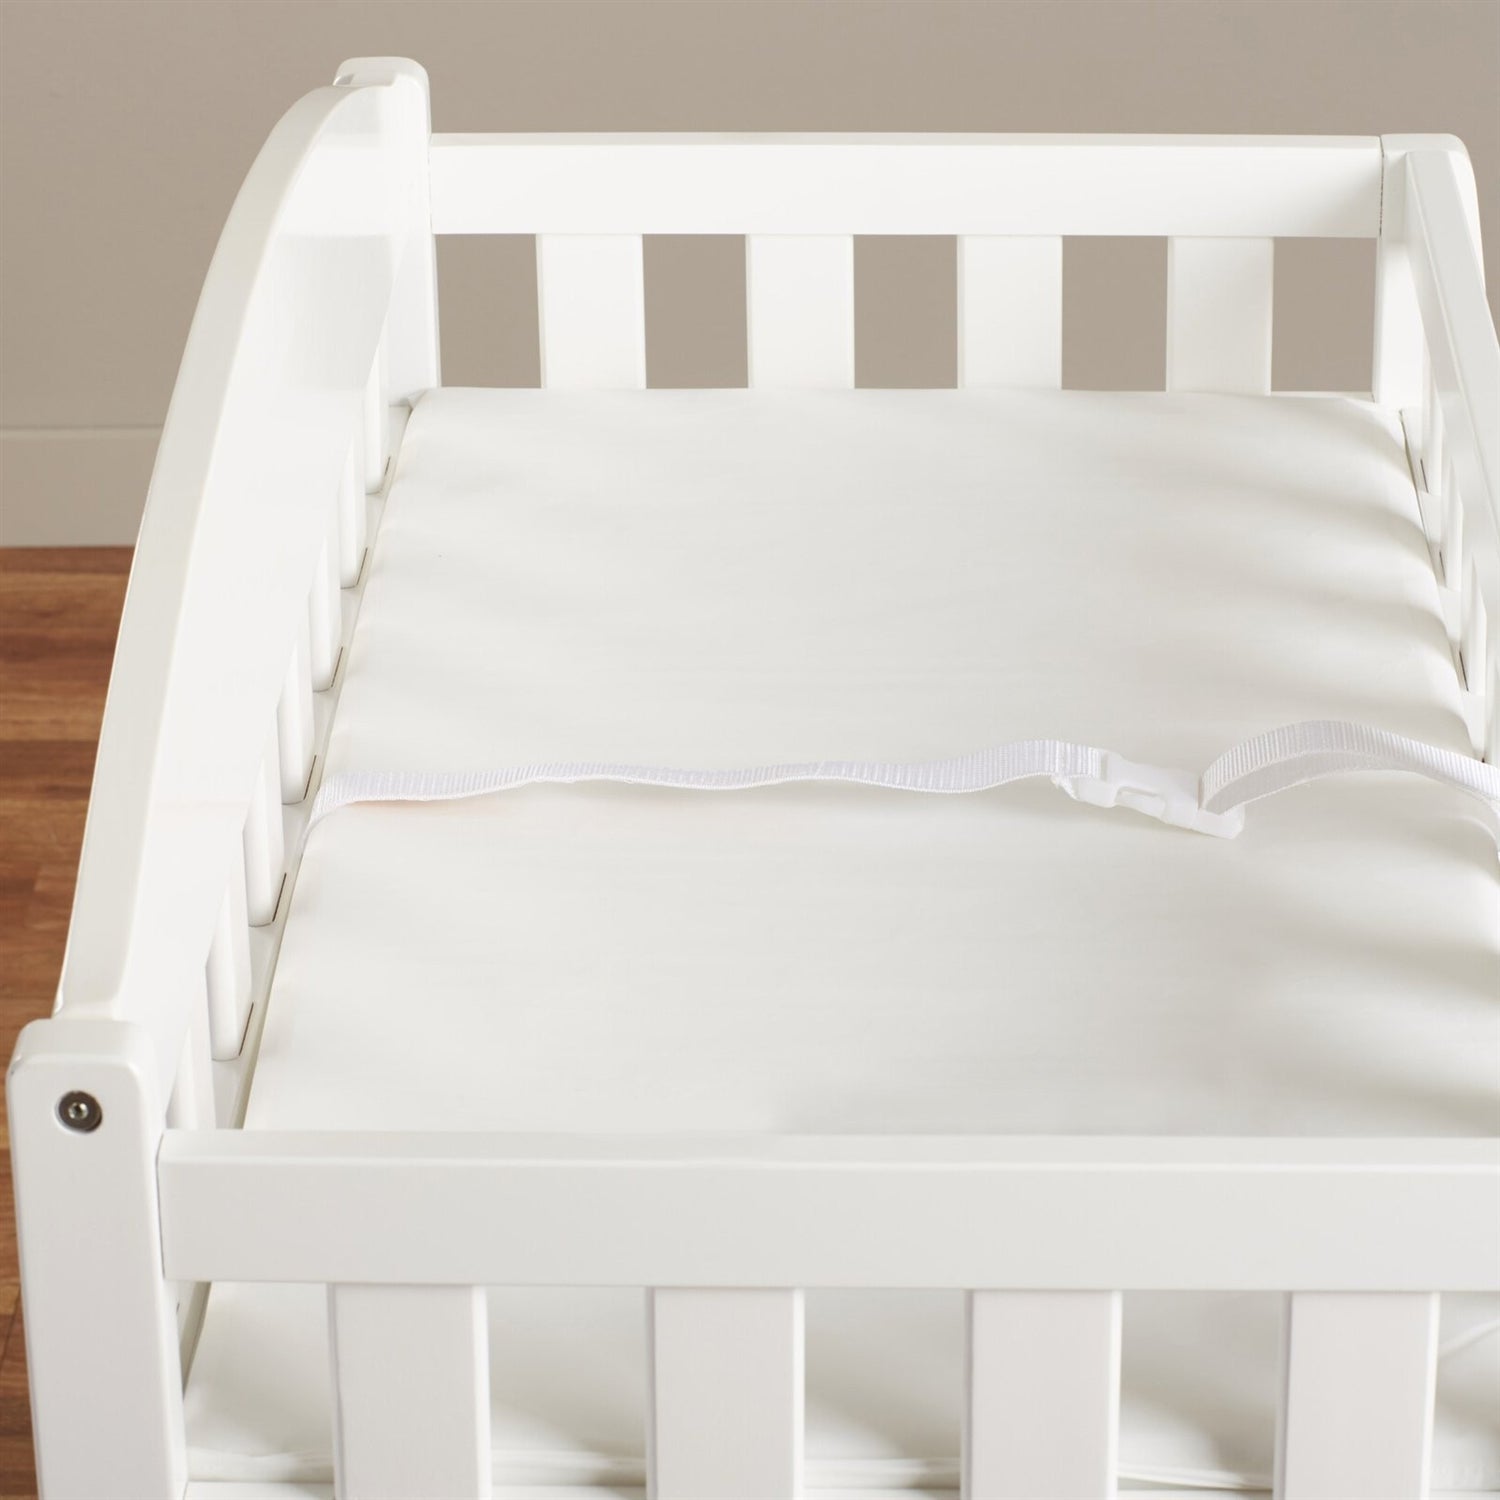 Bedroom > Baby & Kids - Modern White Wooden Baby Changing Table With Safety Rail Pad And Strap